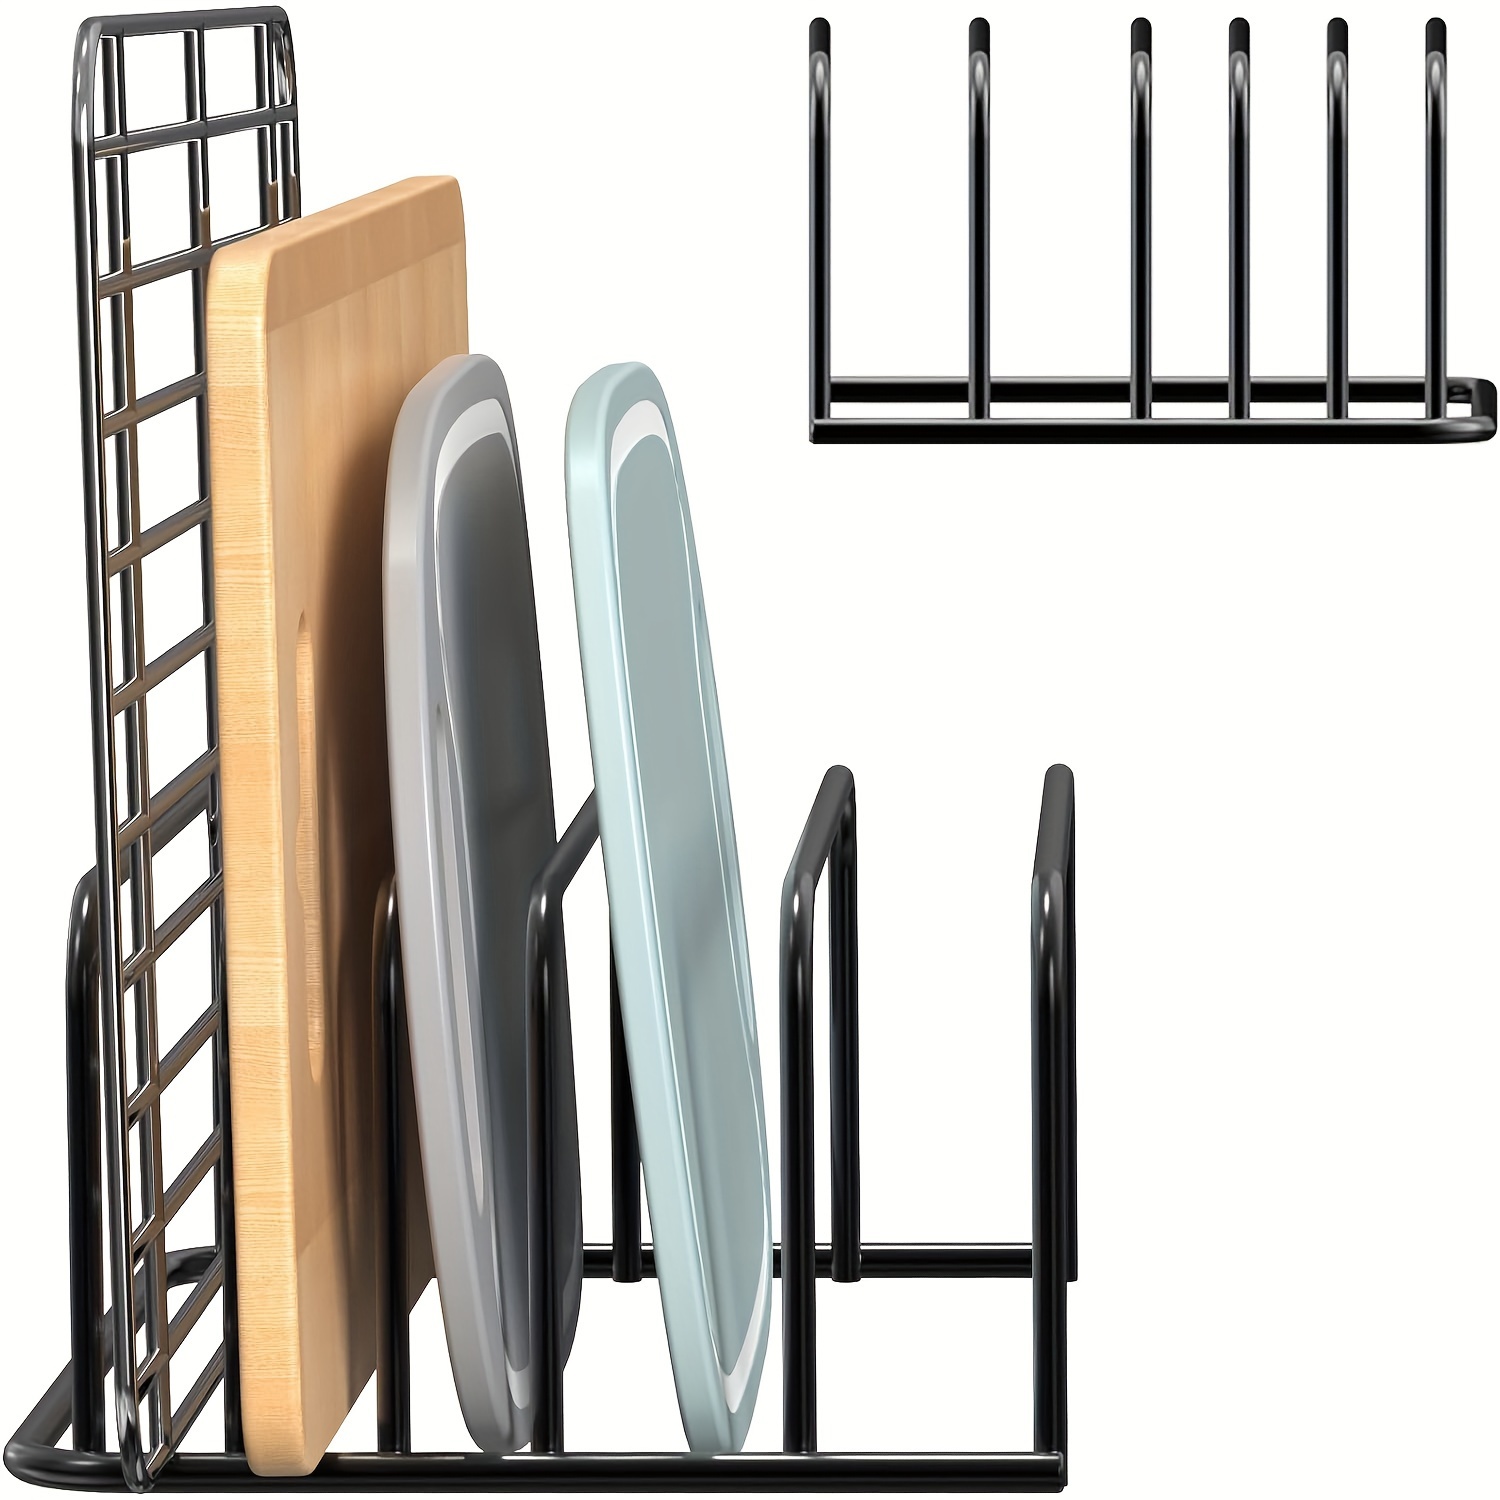 

Compact And Convenient Cutting Board Organizer: [1-pack] Metal Black Rack For Kitchen Cabinet Countertop Storage - Perfect For Baking Sheets And Cooling Racks